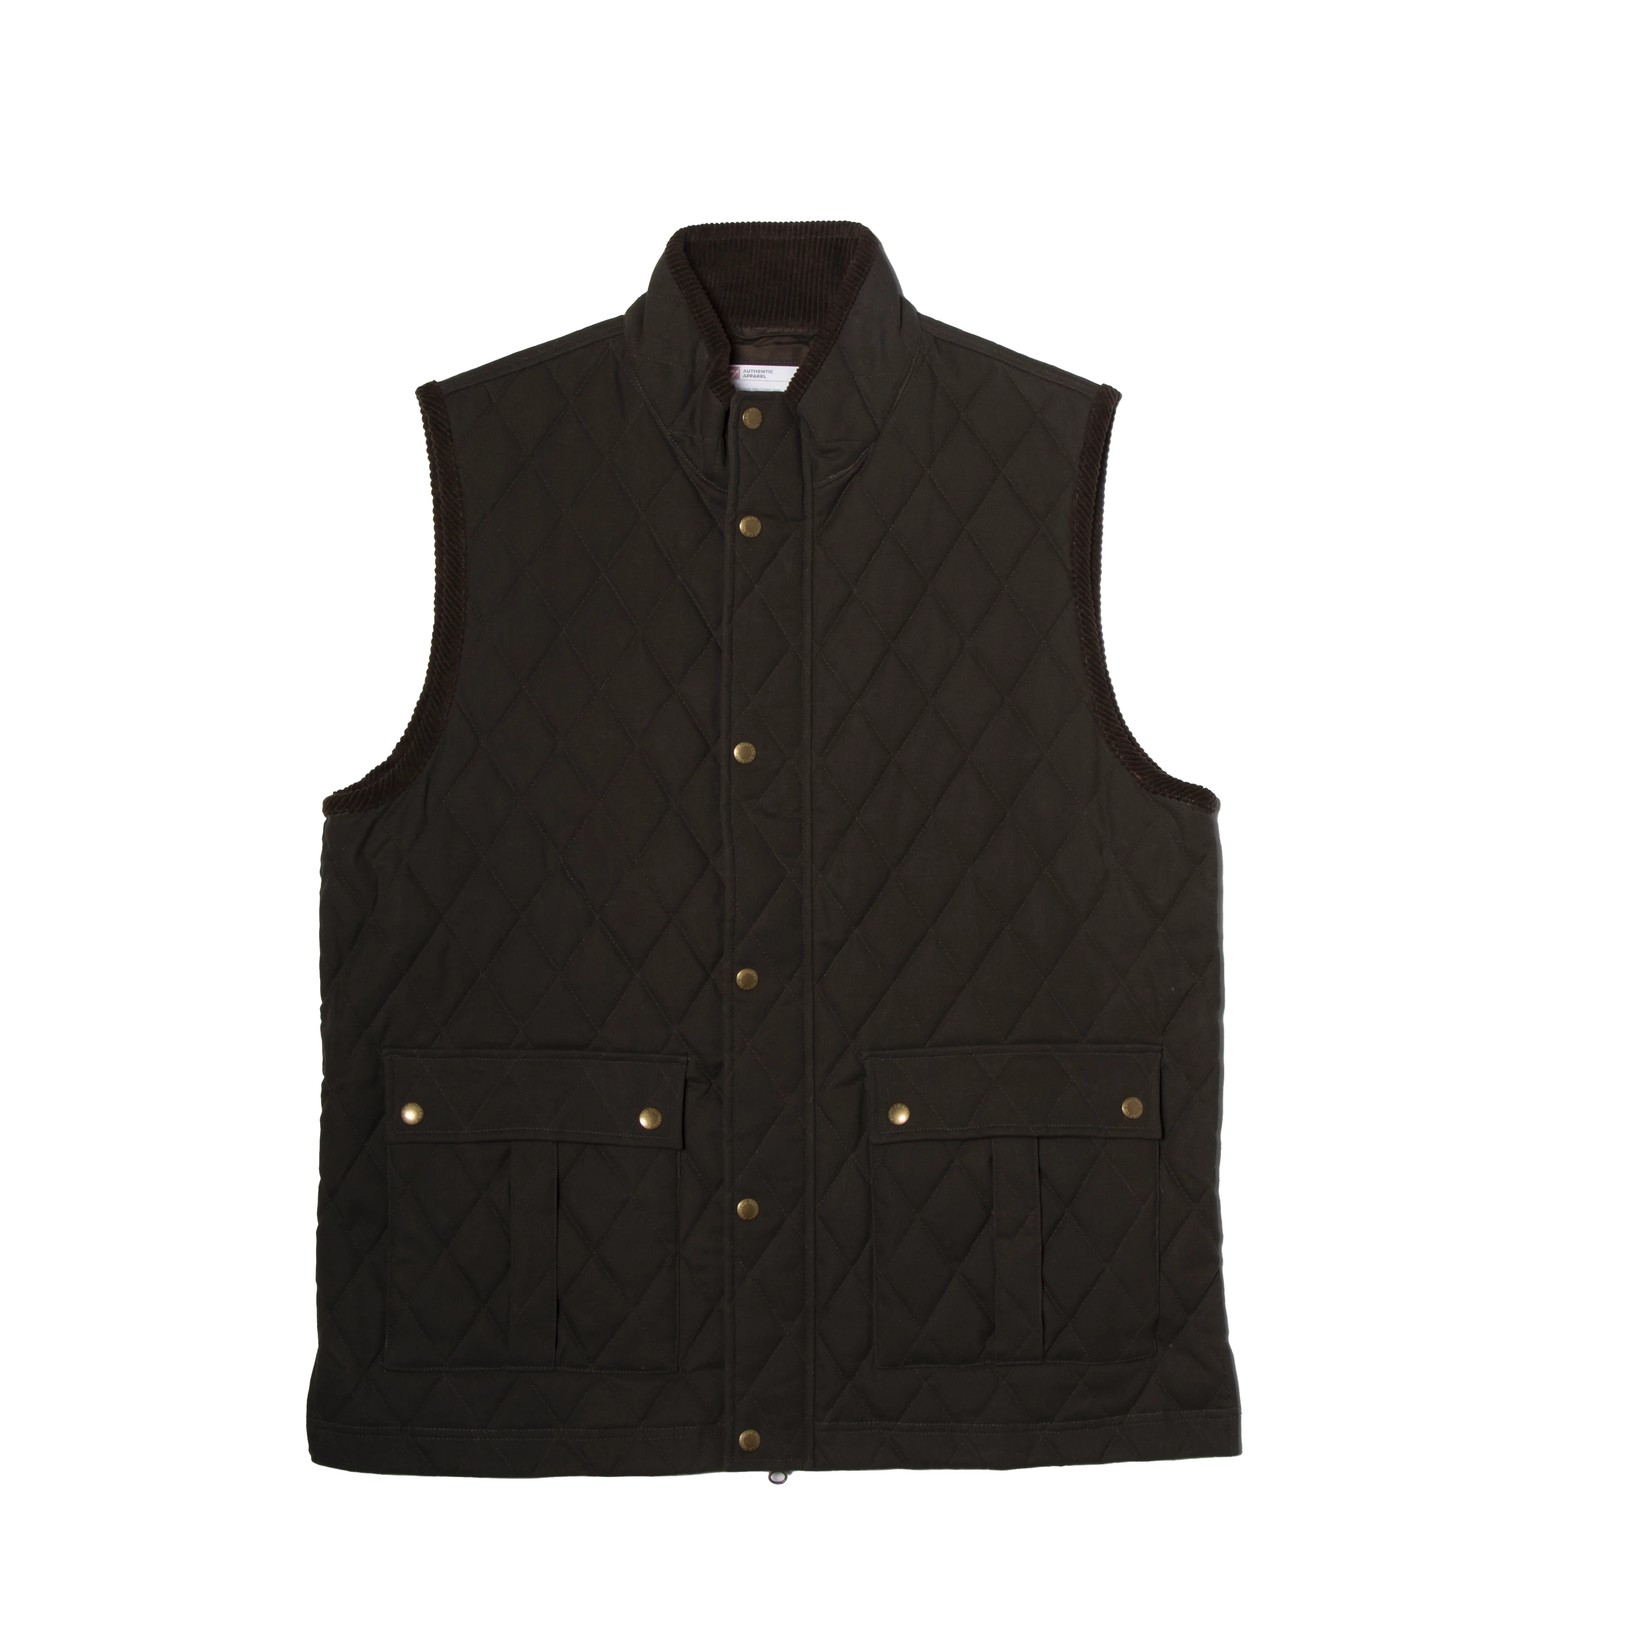 Southern Point Heritage Waxed Cotton Vest, Pine